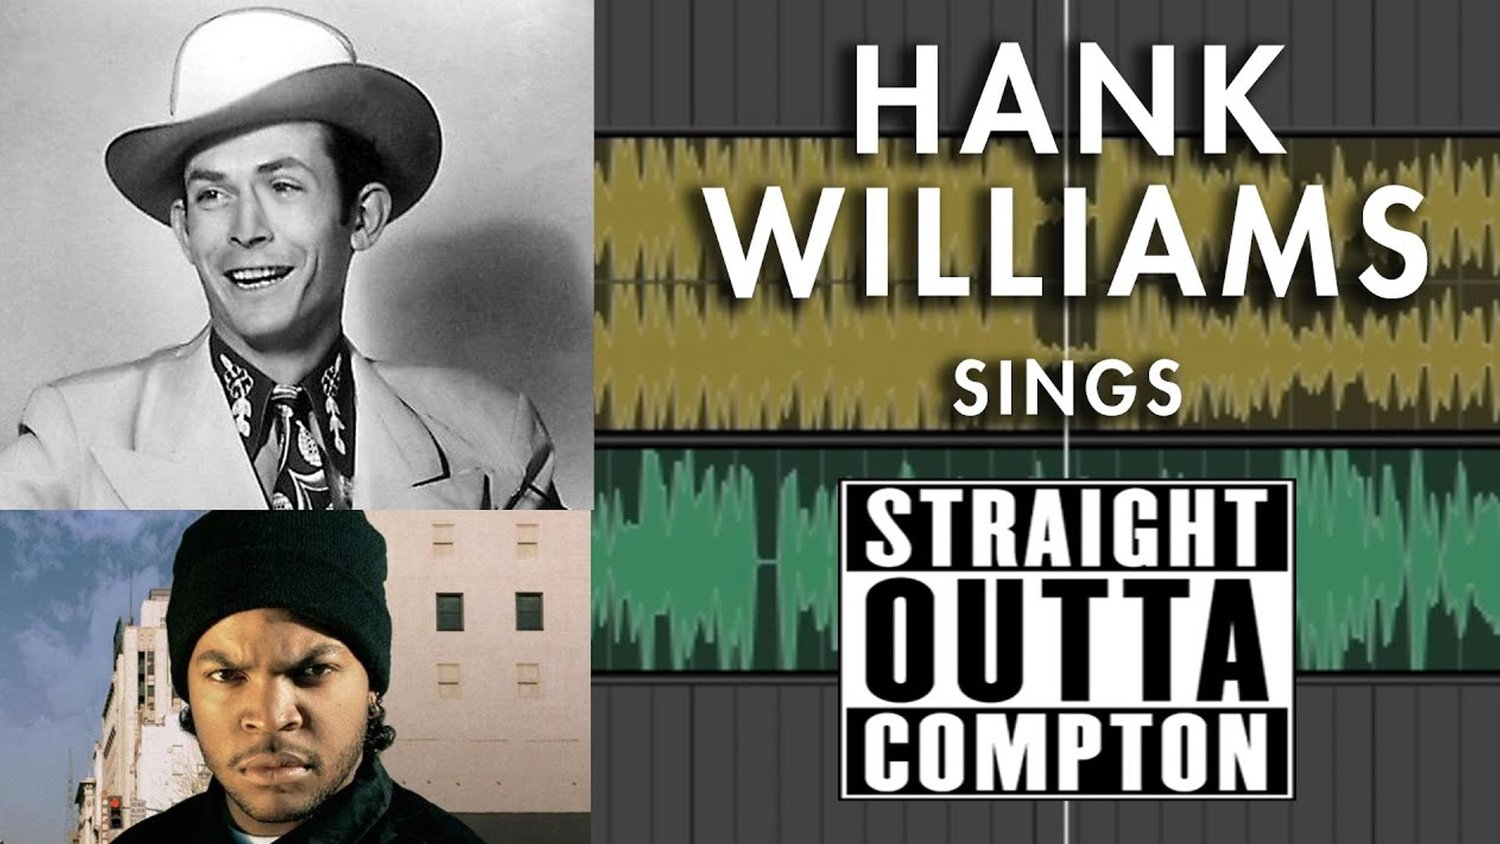 You Can Now Listen To Hank Williams Sing « Straight Outta Compton »